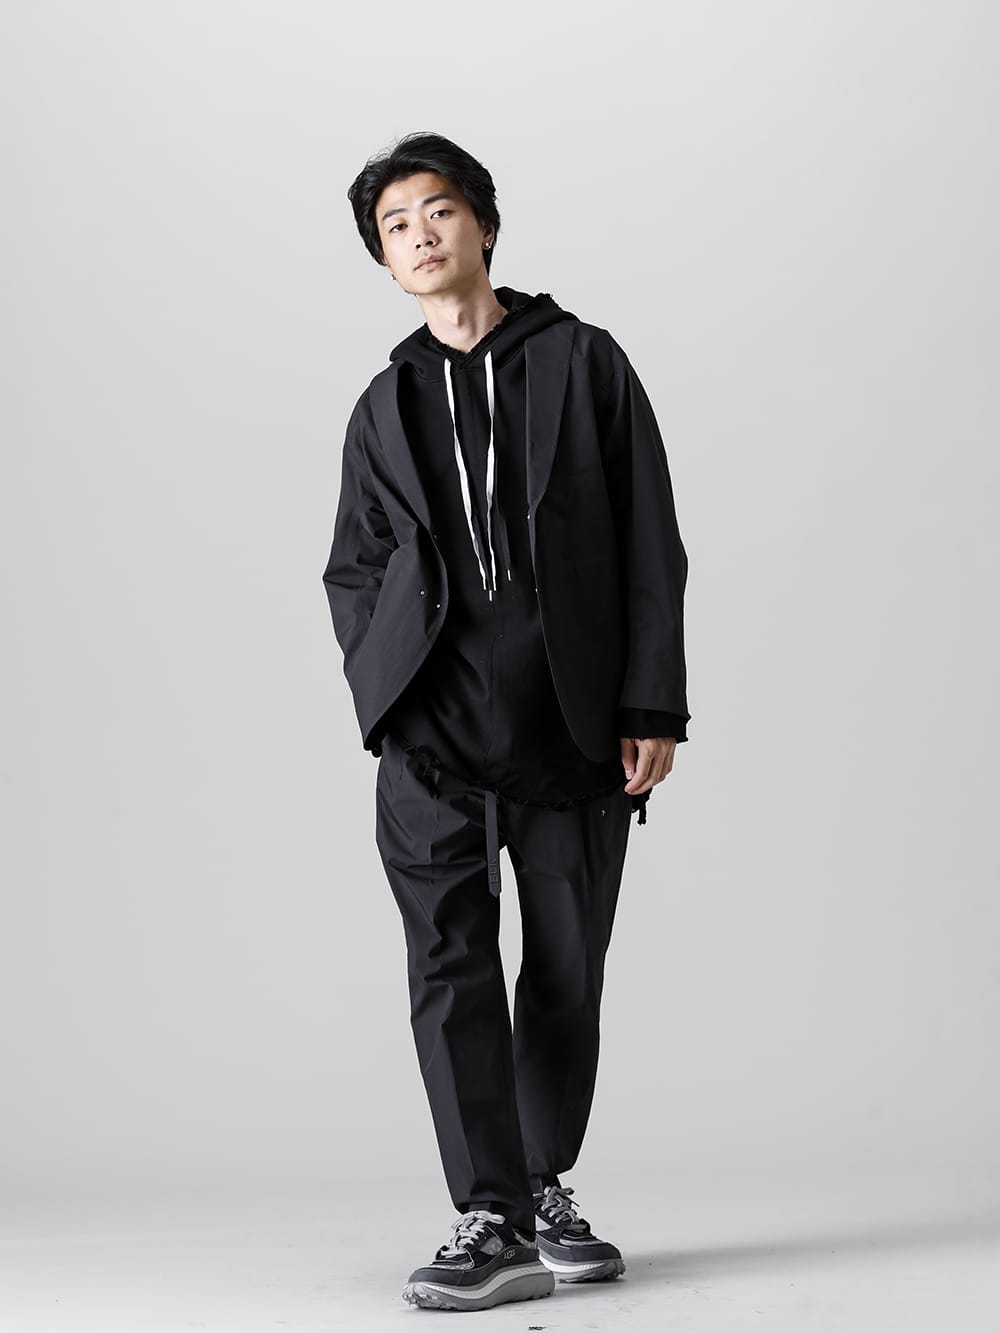 White Mountaineering テックウェザーセットアップ ラフスタイル